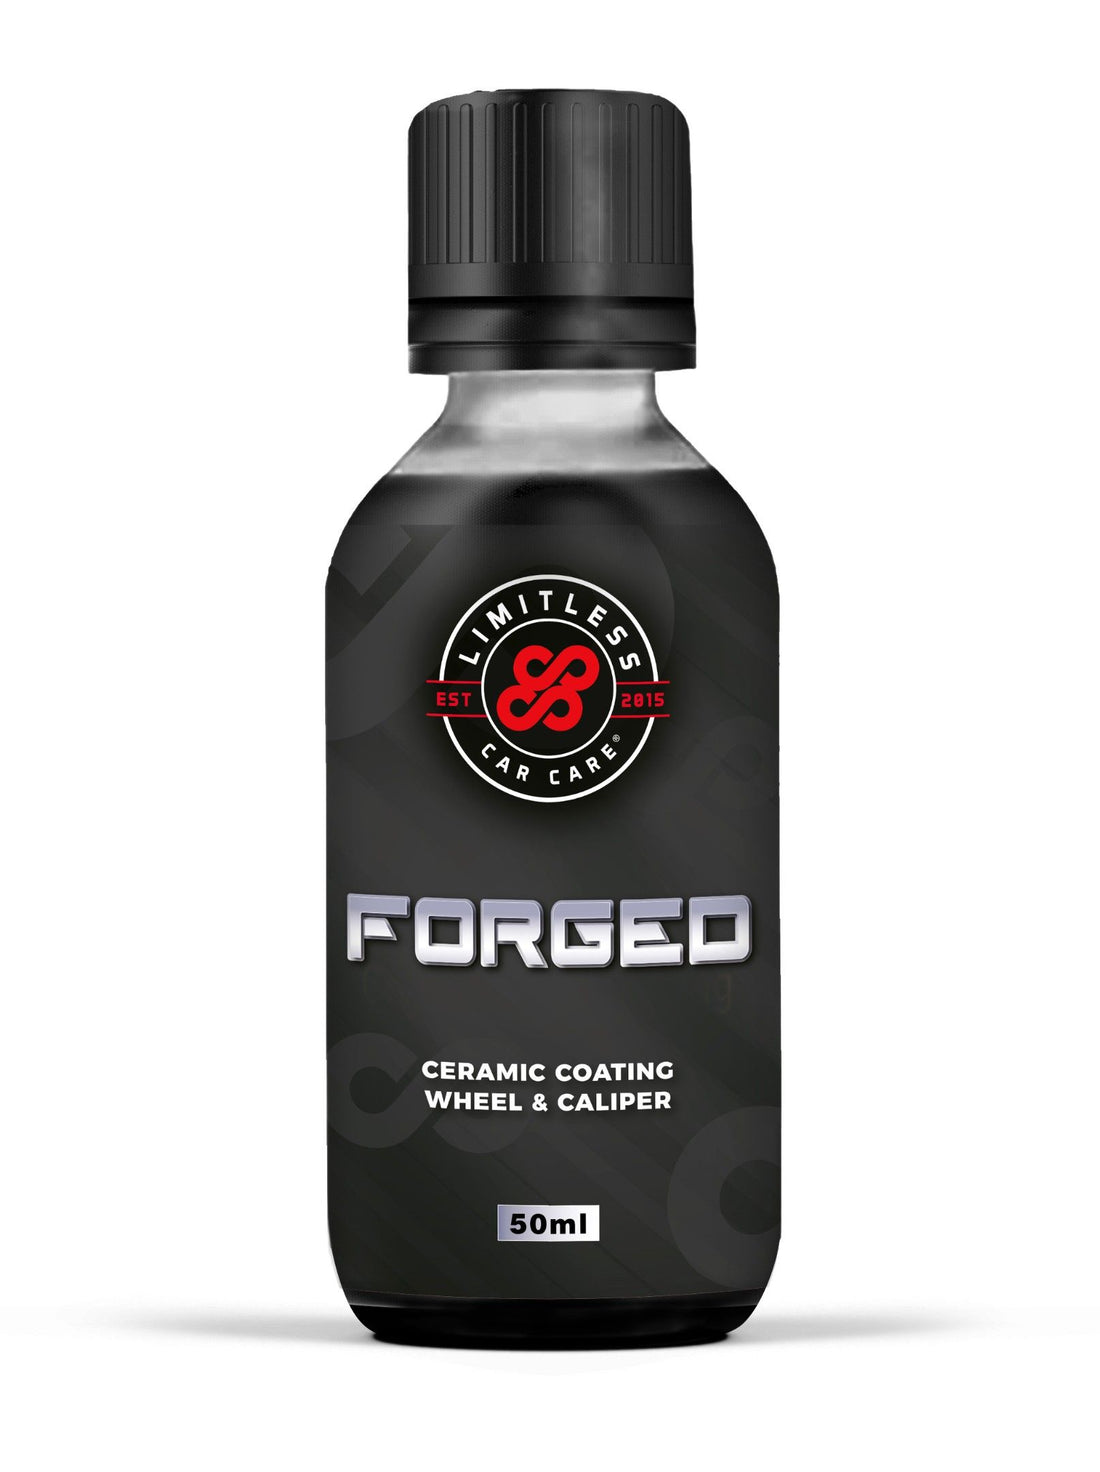 Limitless Car Care FORGED Wheel & Caliper Ceramic Coating 50ml - Detailing Connect